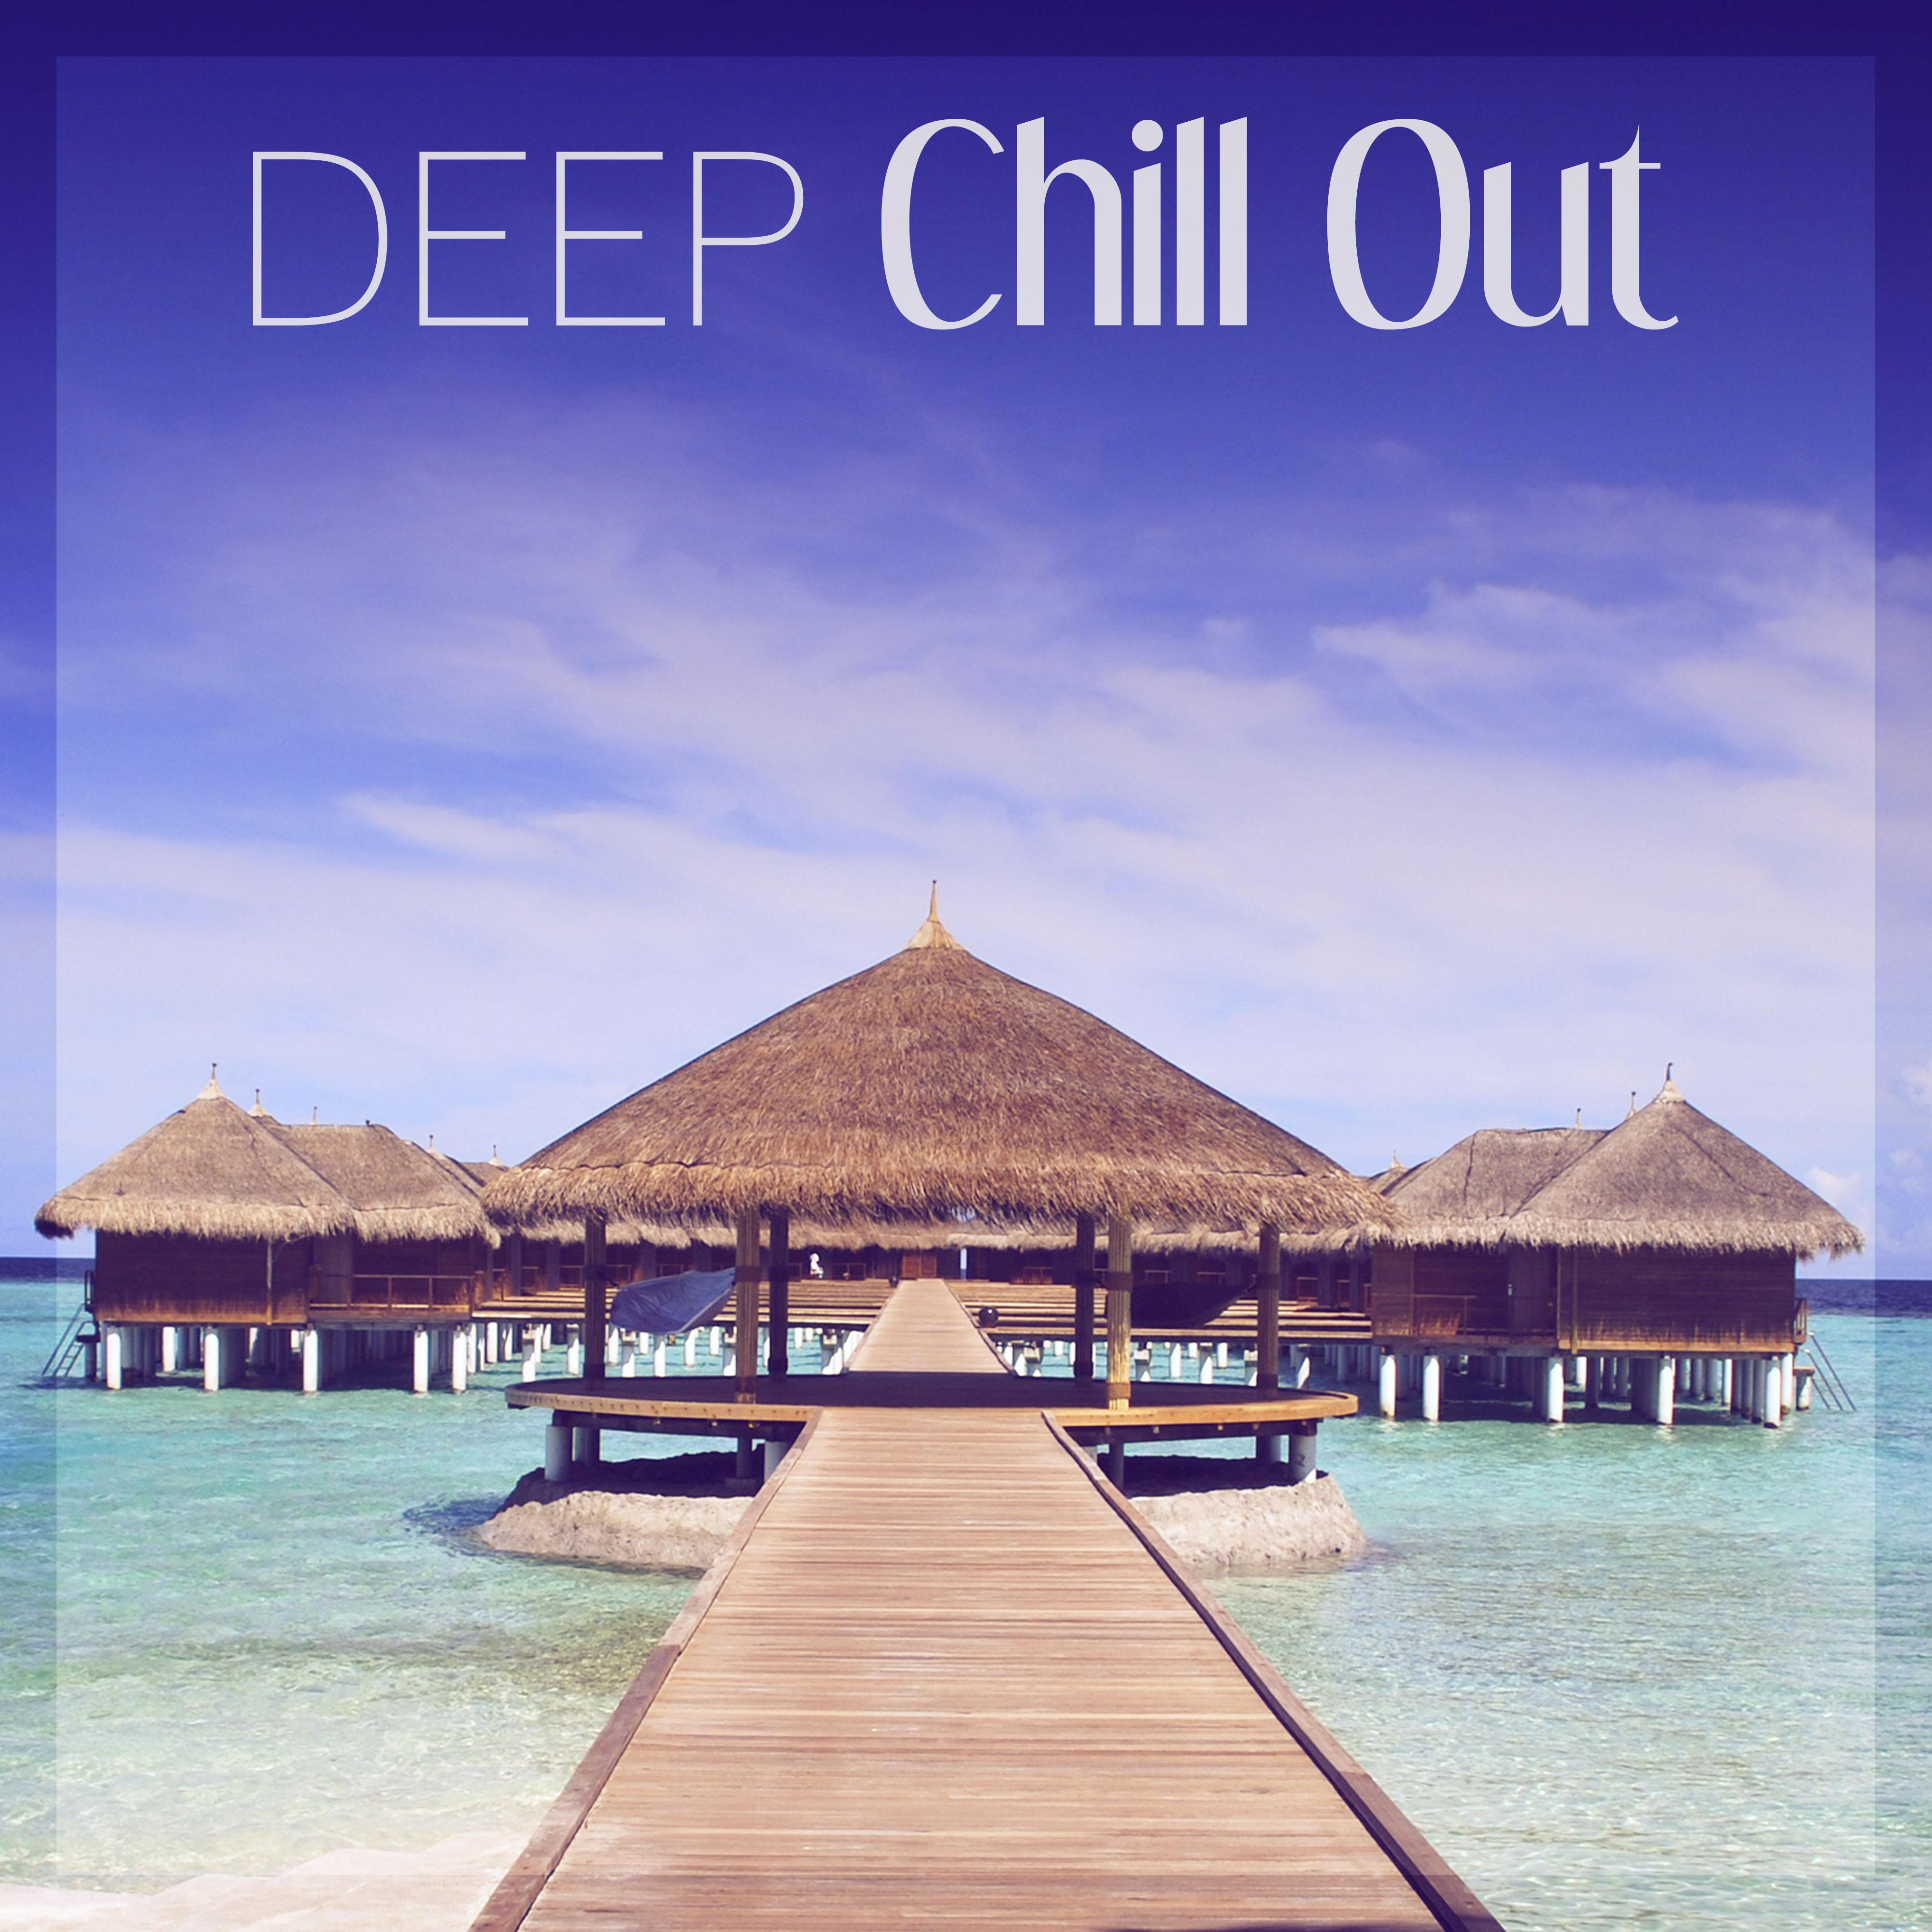 Deep Chill Out - Chillout Hits, Positive Vibes, Deep Dive, Ibiza Beach Party Night, Lounge Summer